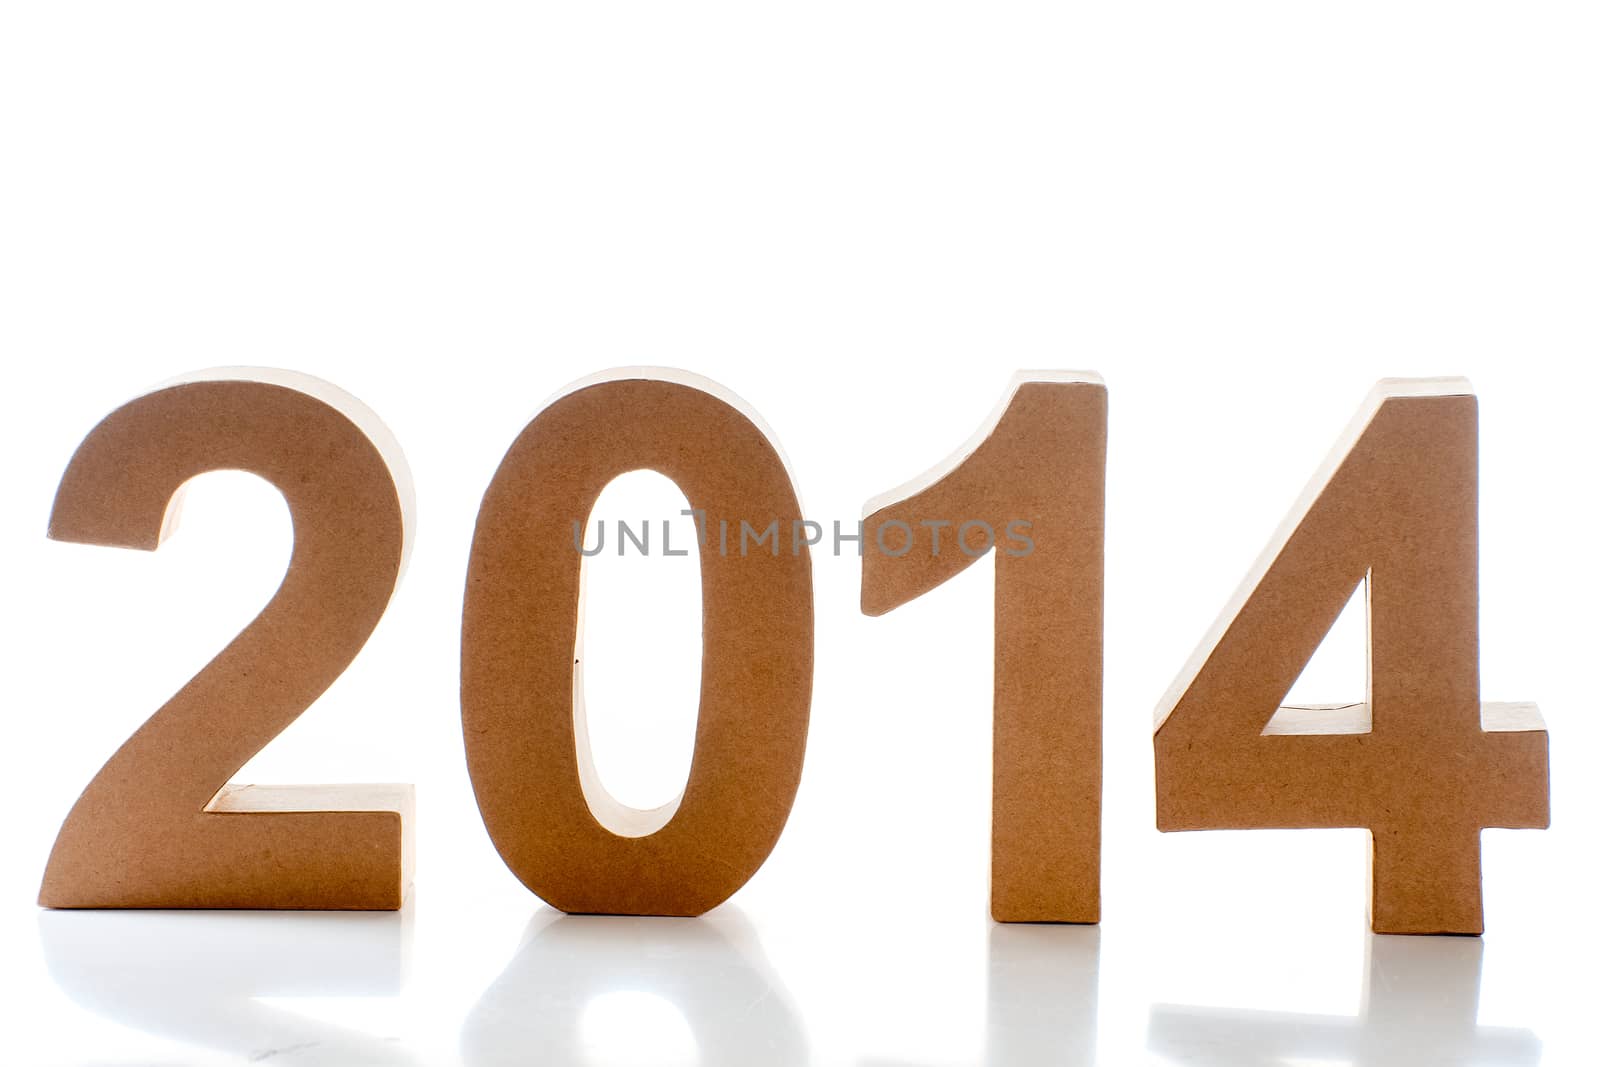 The year 2014 on a white background